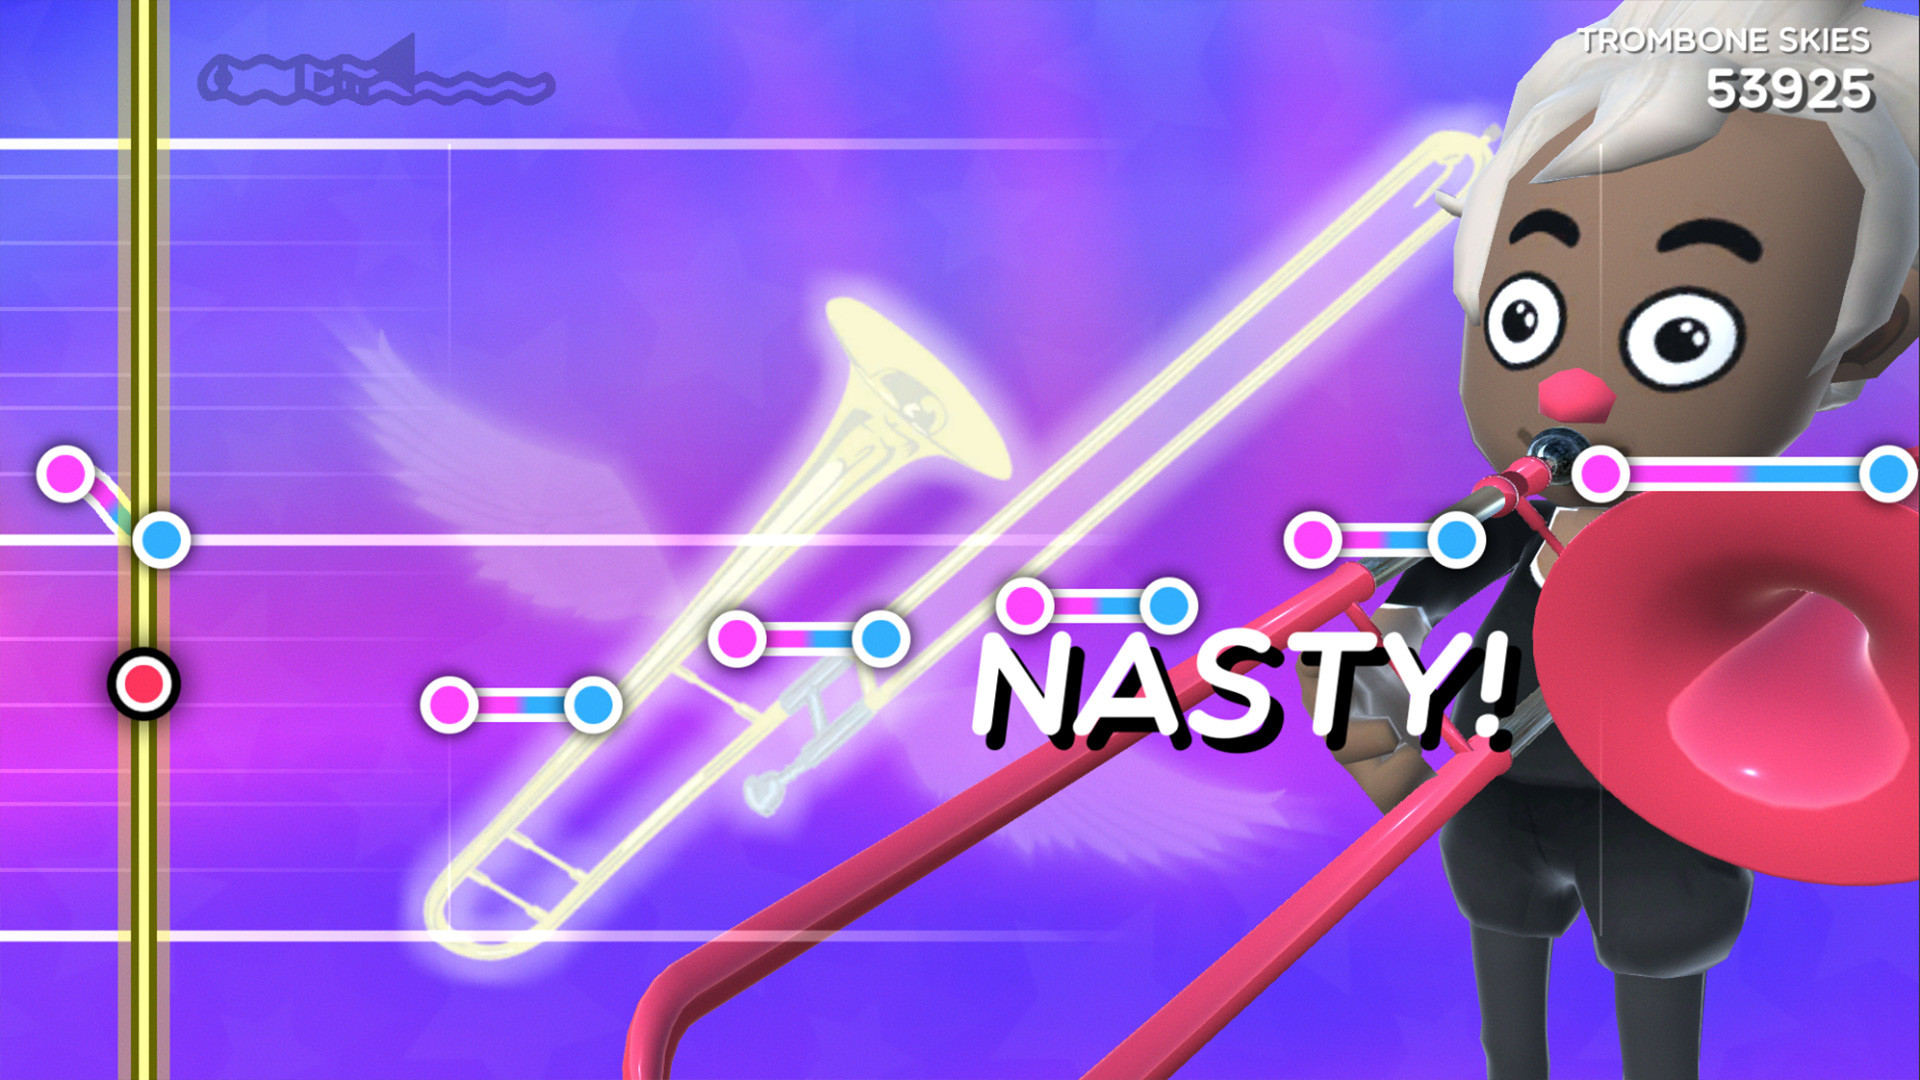 A low poly illustrated style character holding a trombone to the left. The screen has bars indicating which notes to play, in this rhythm game.